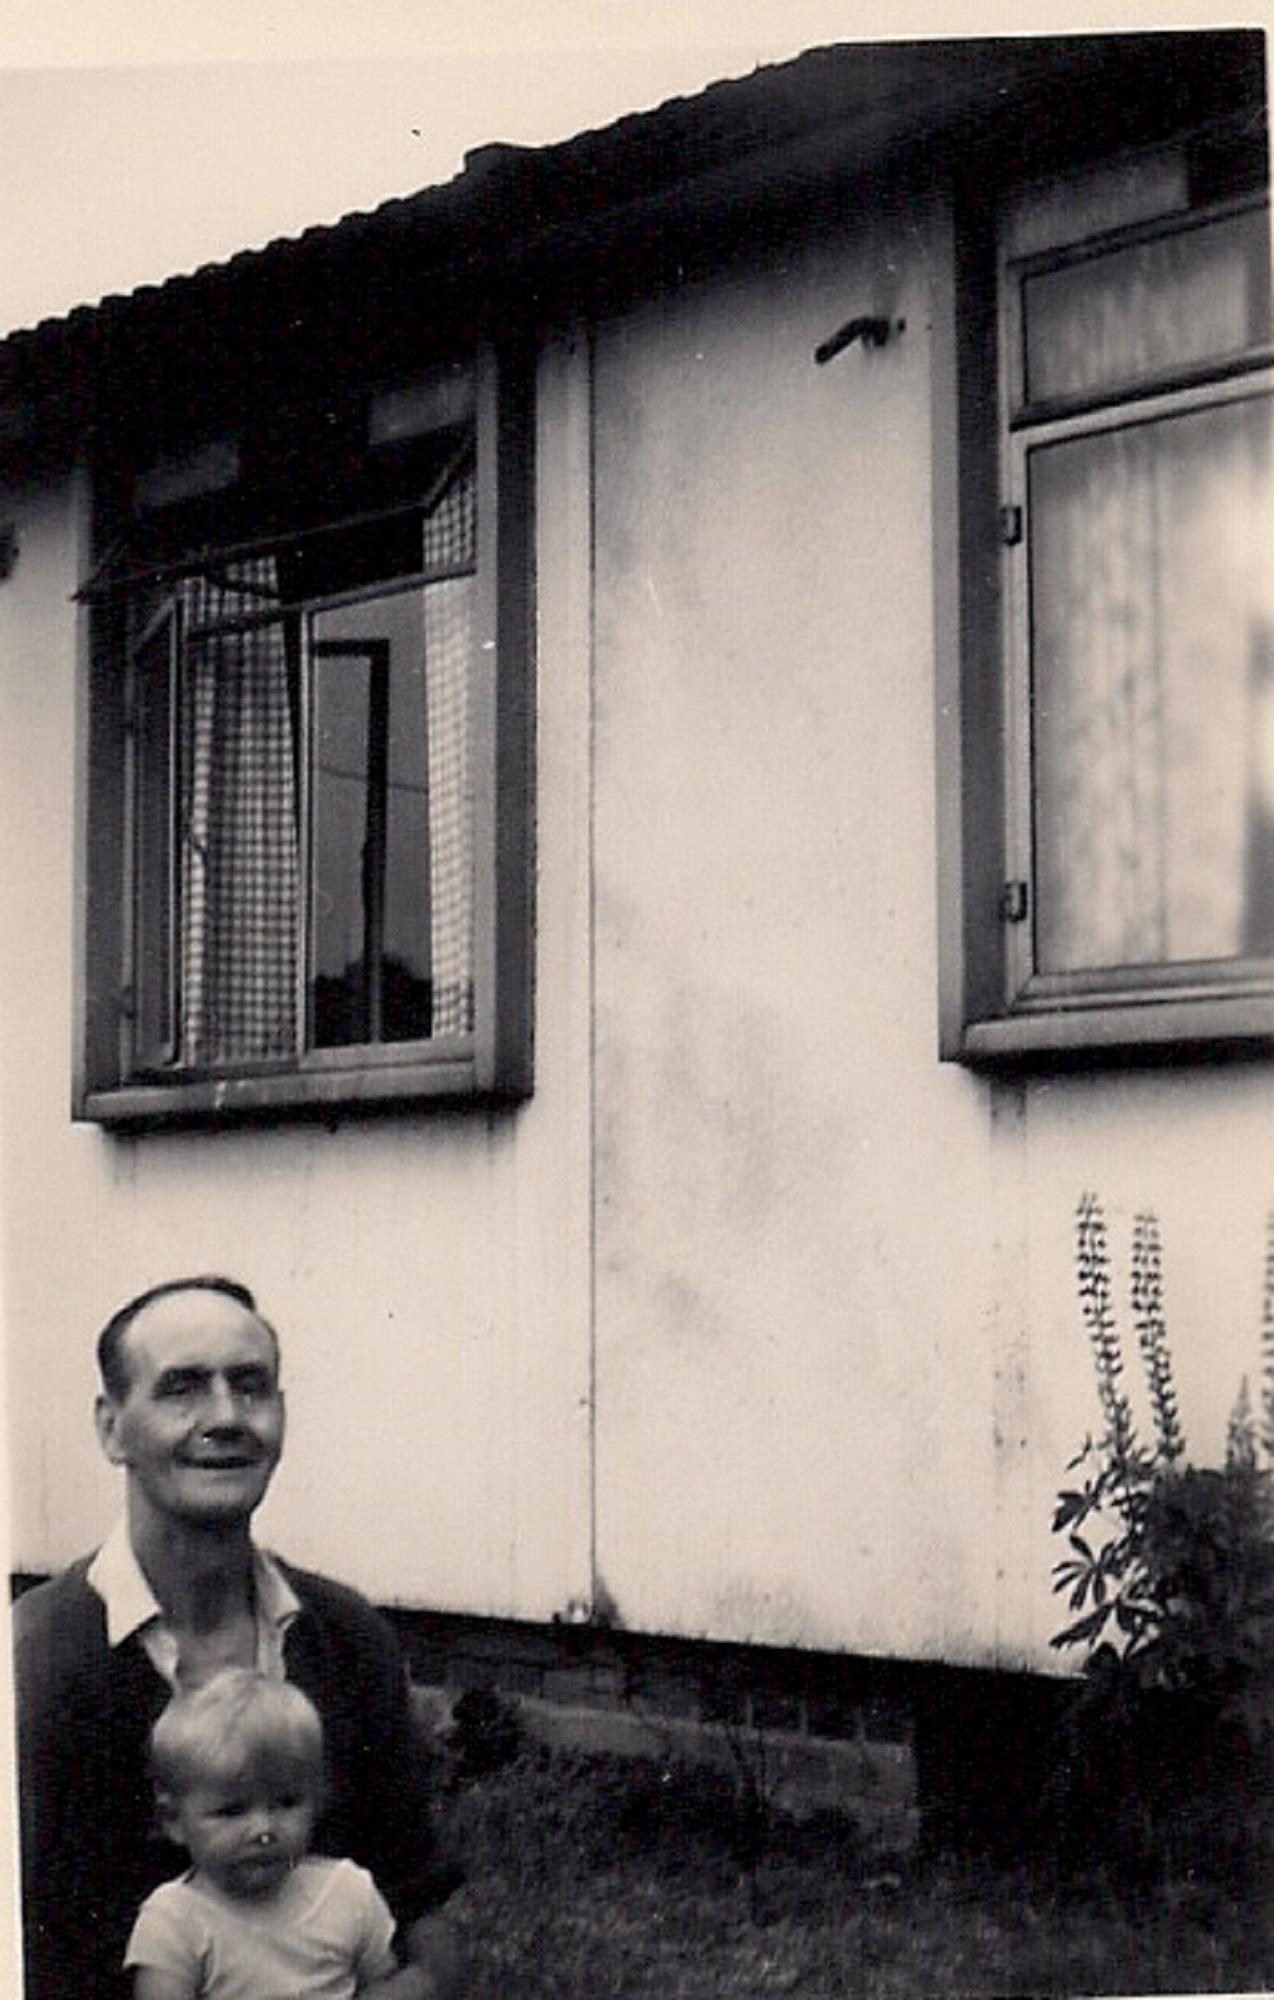 Martyn with his grandfather outside the prefab. Stapleford Road, Kings Norton